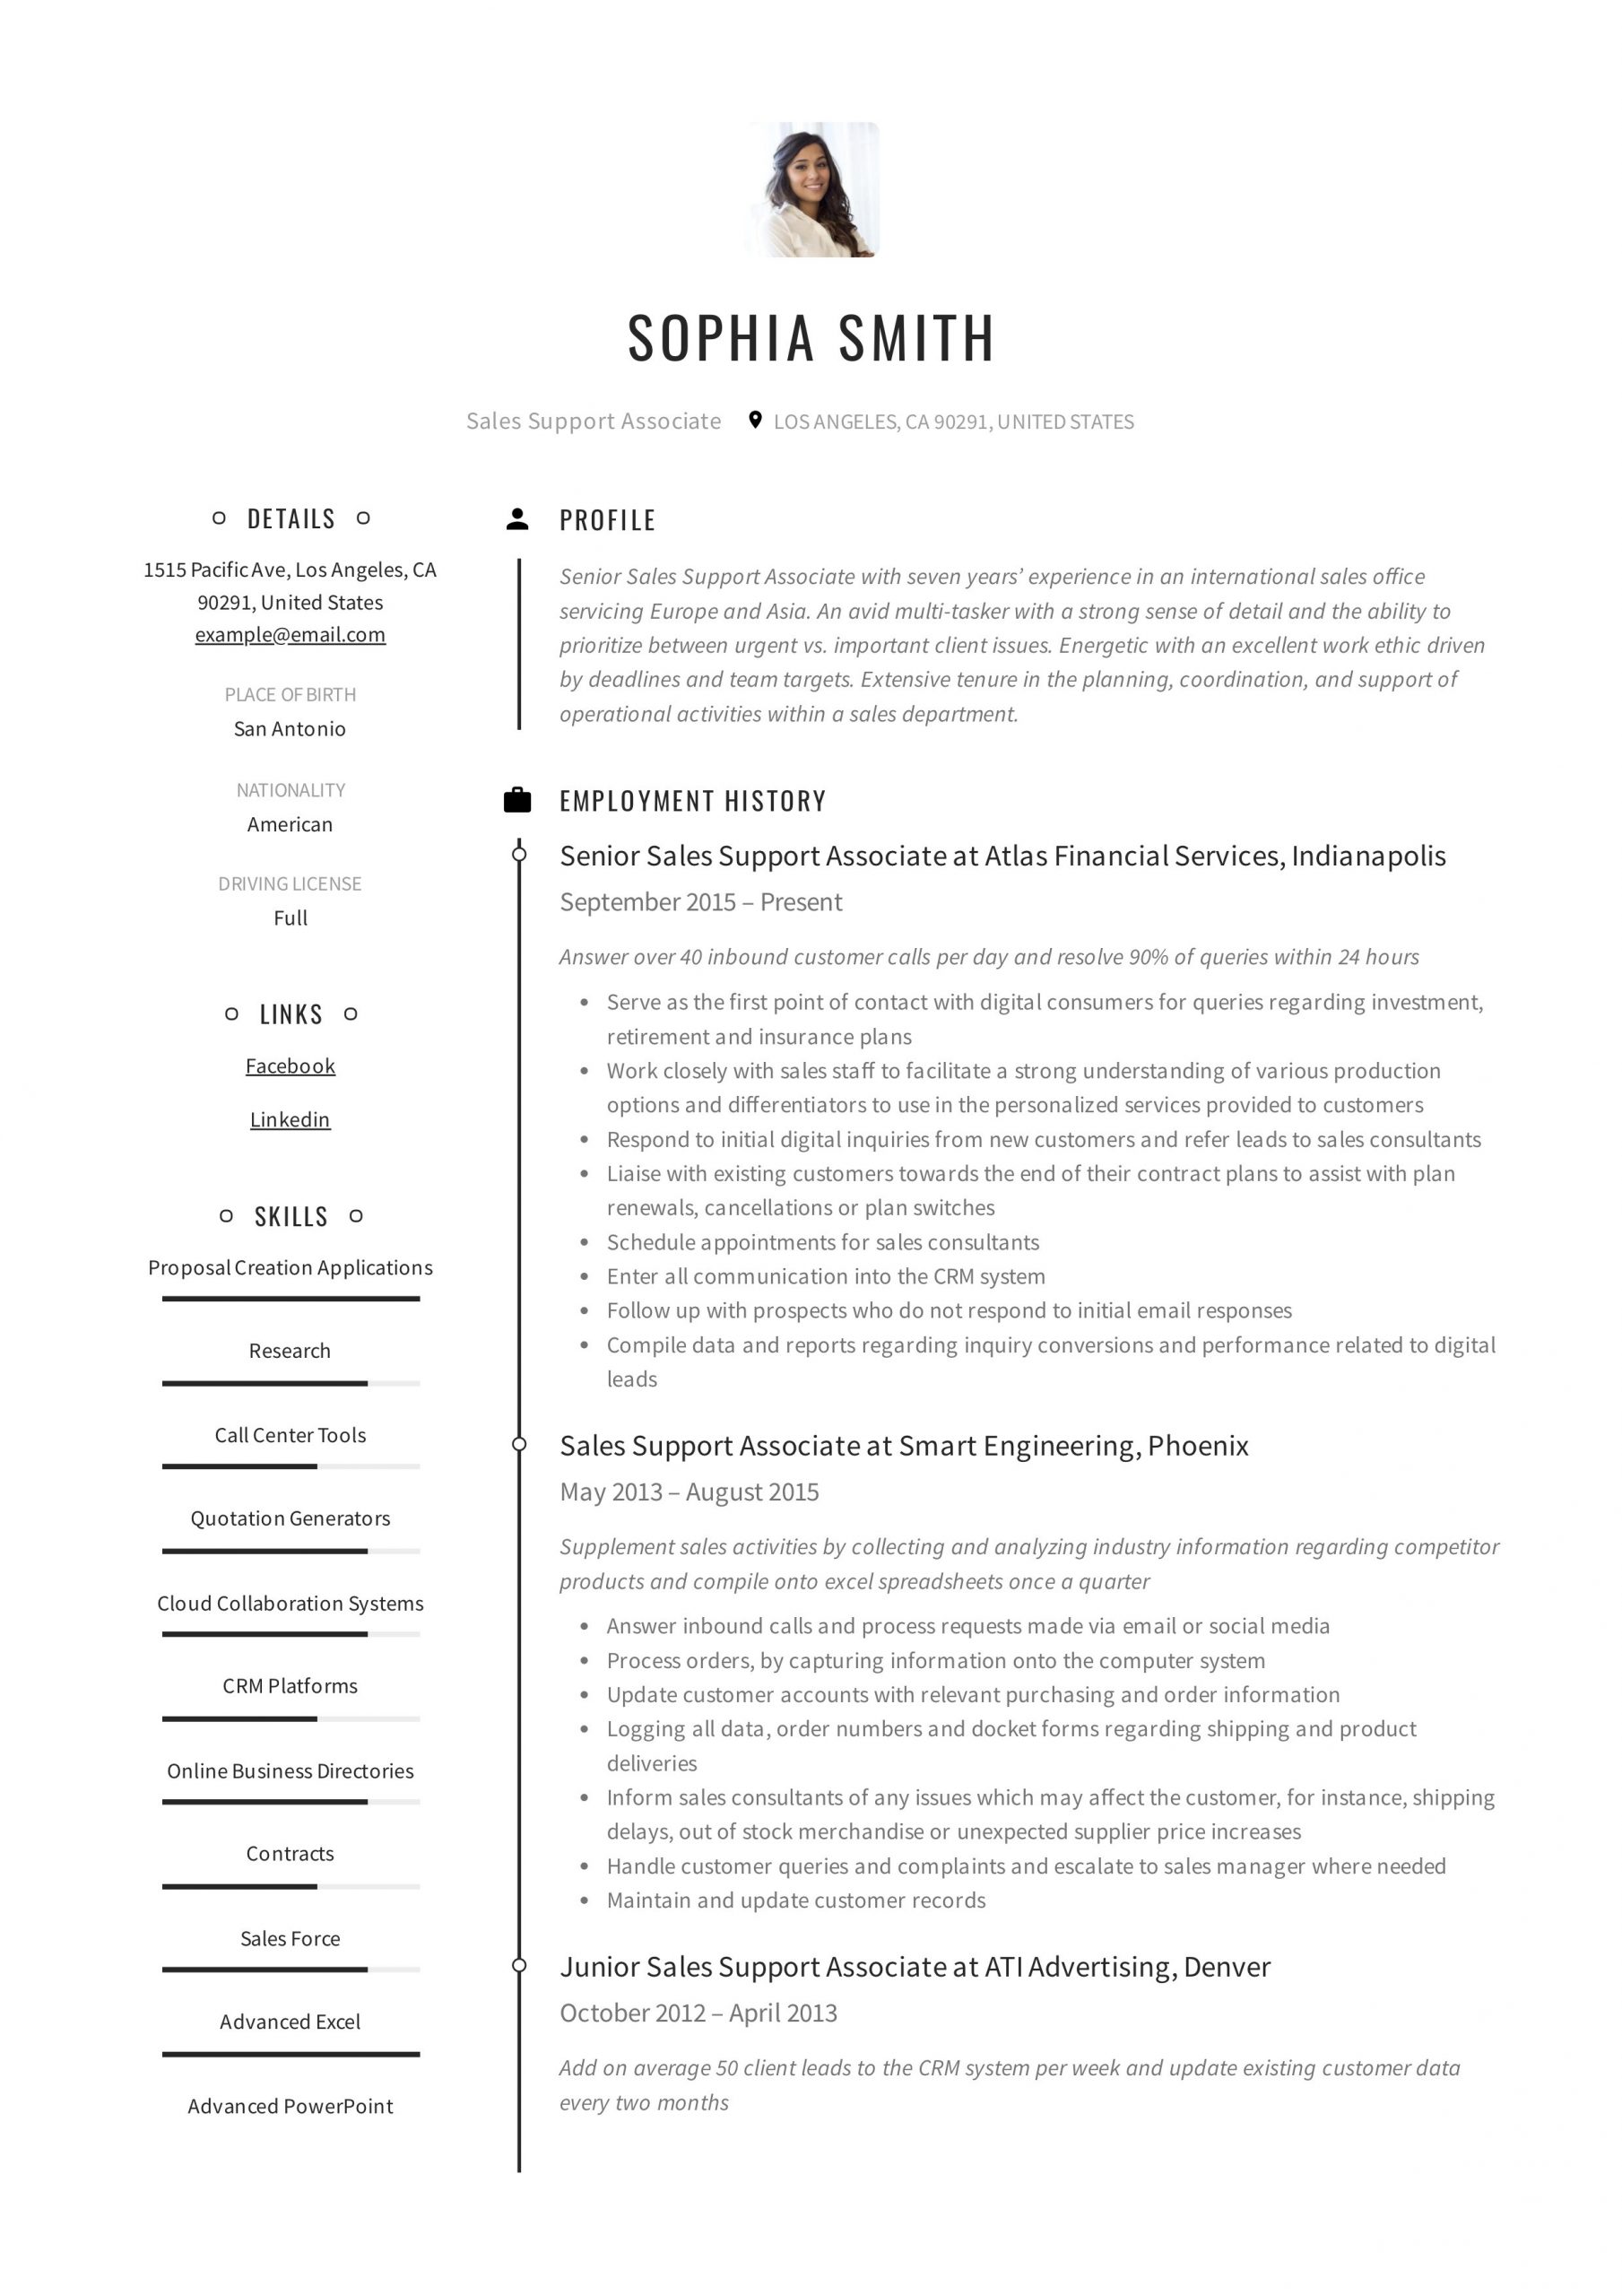 Sample Resume for Sales and Customer Service Sales Support associate Resume & Guide  12 Resume Examples 2020